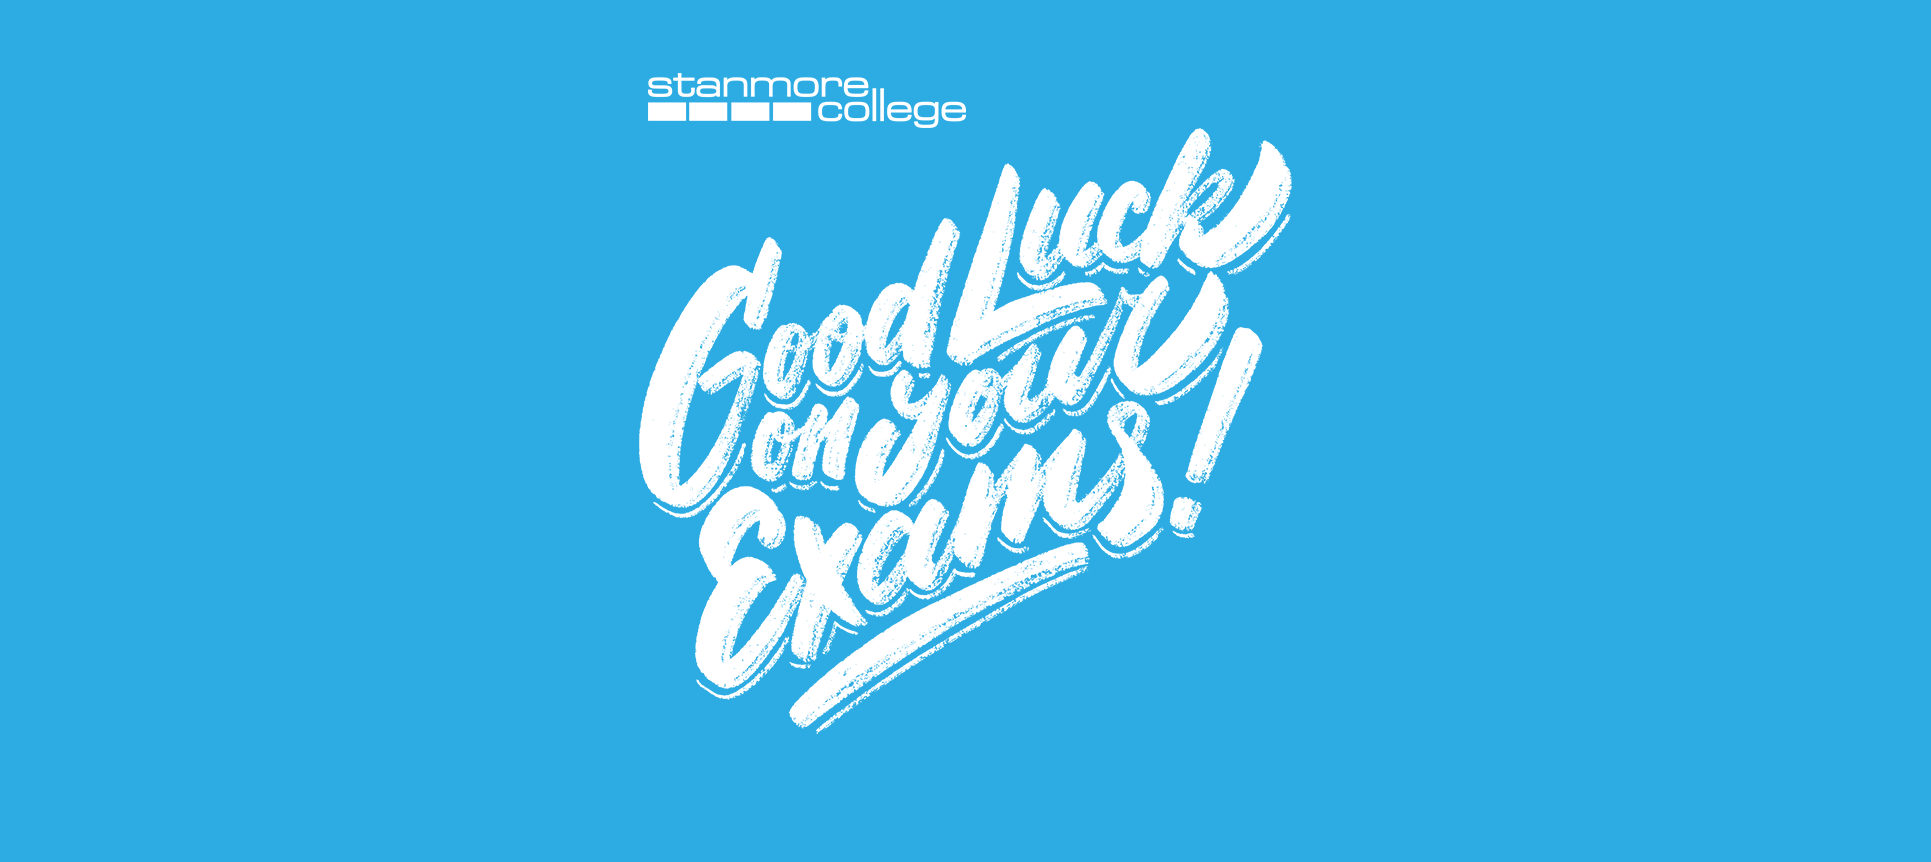 Good Luck with your Exams